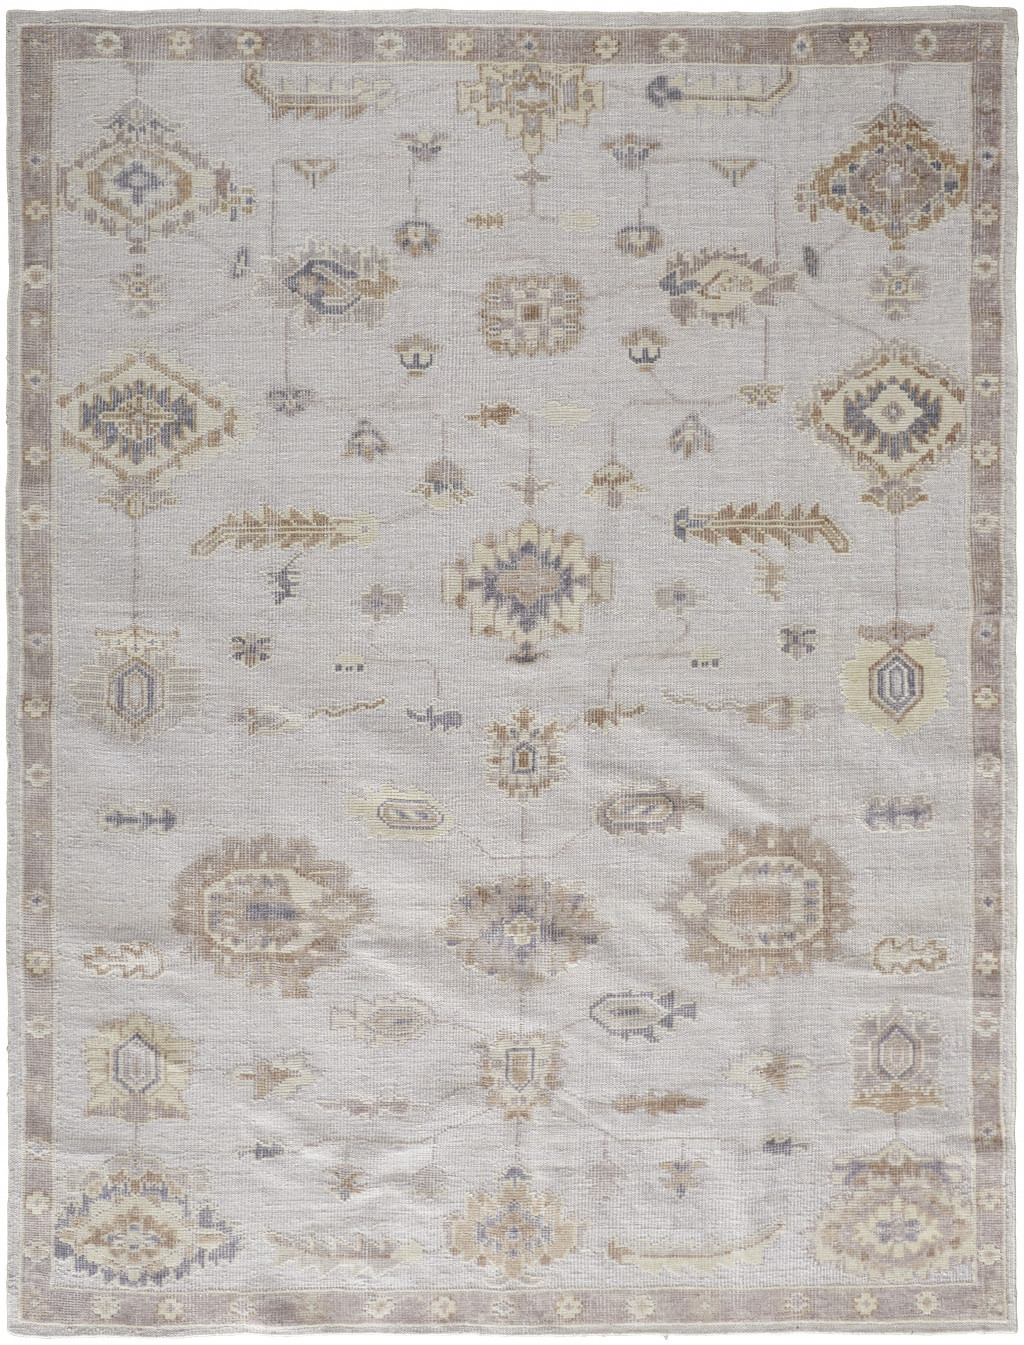 10' X 14' Ivory And Orange Floral Hand Knotted Stain Resistant Area Rug-514974-1